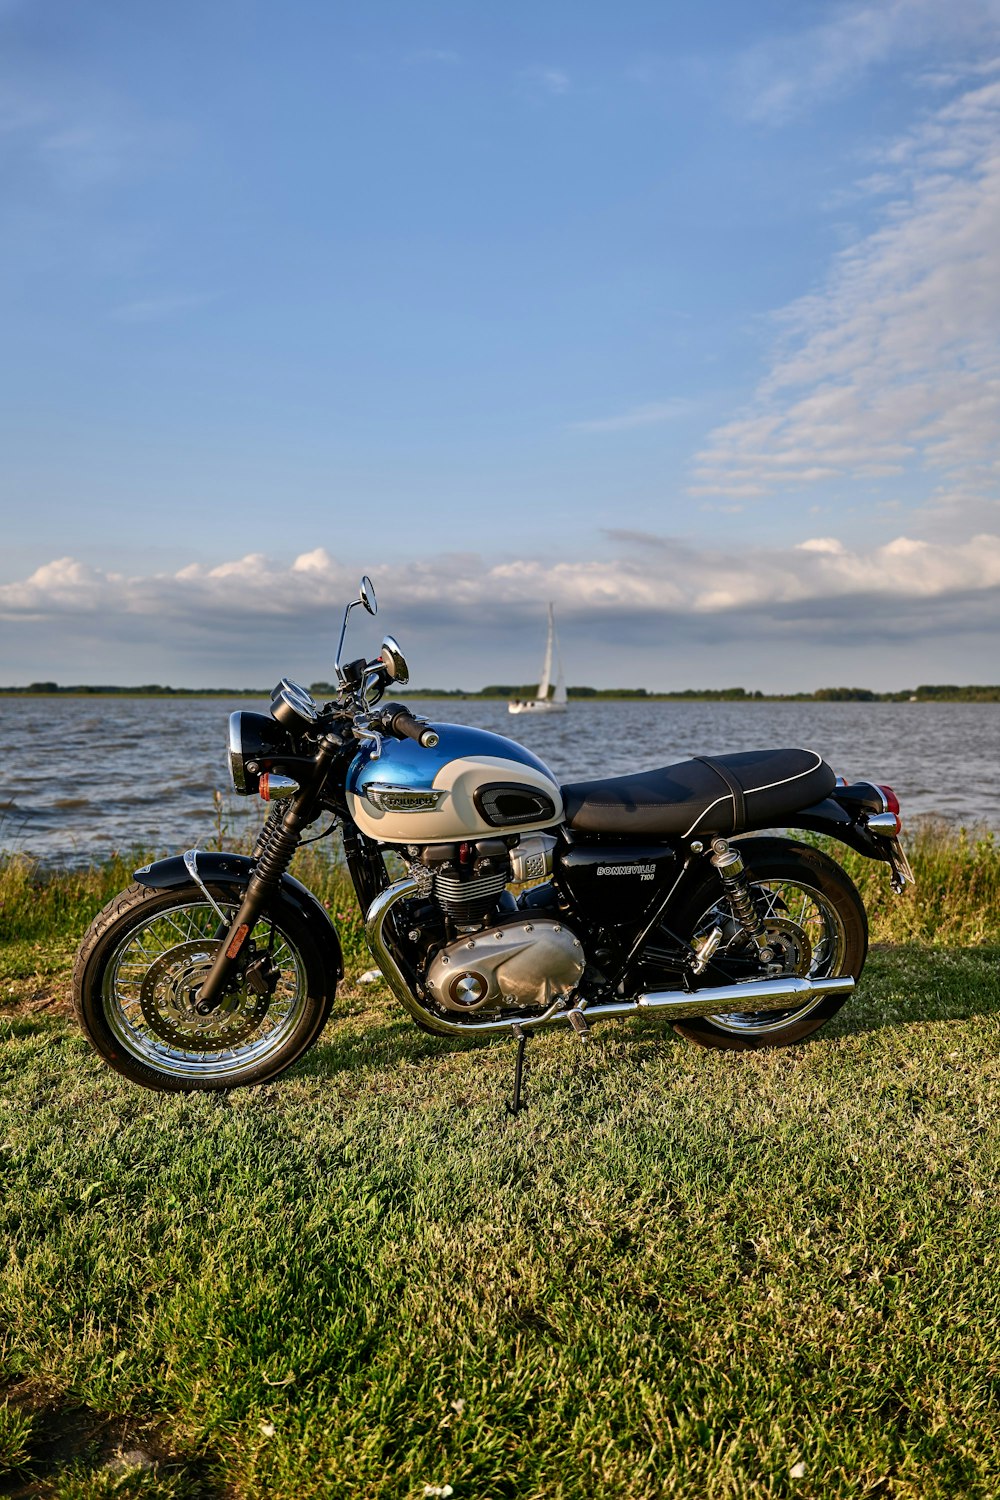 a motorcycle is parked on the grass near the water